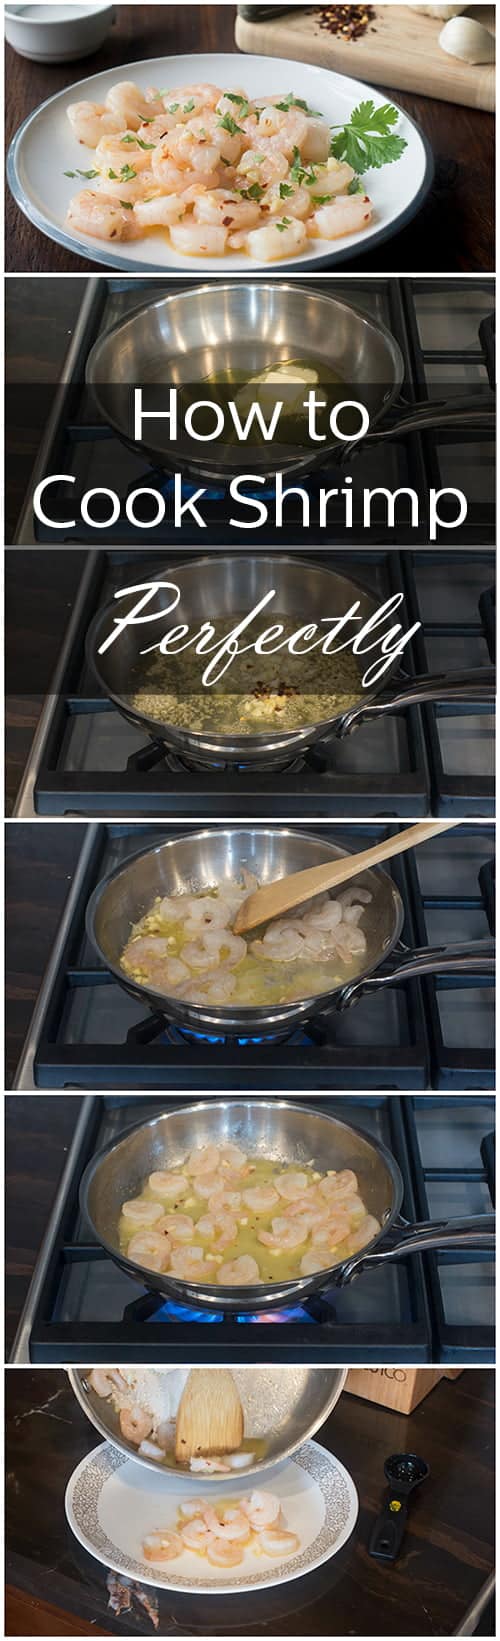 How to Cook Shrimp Perfectly